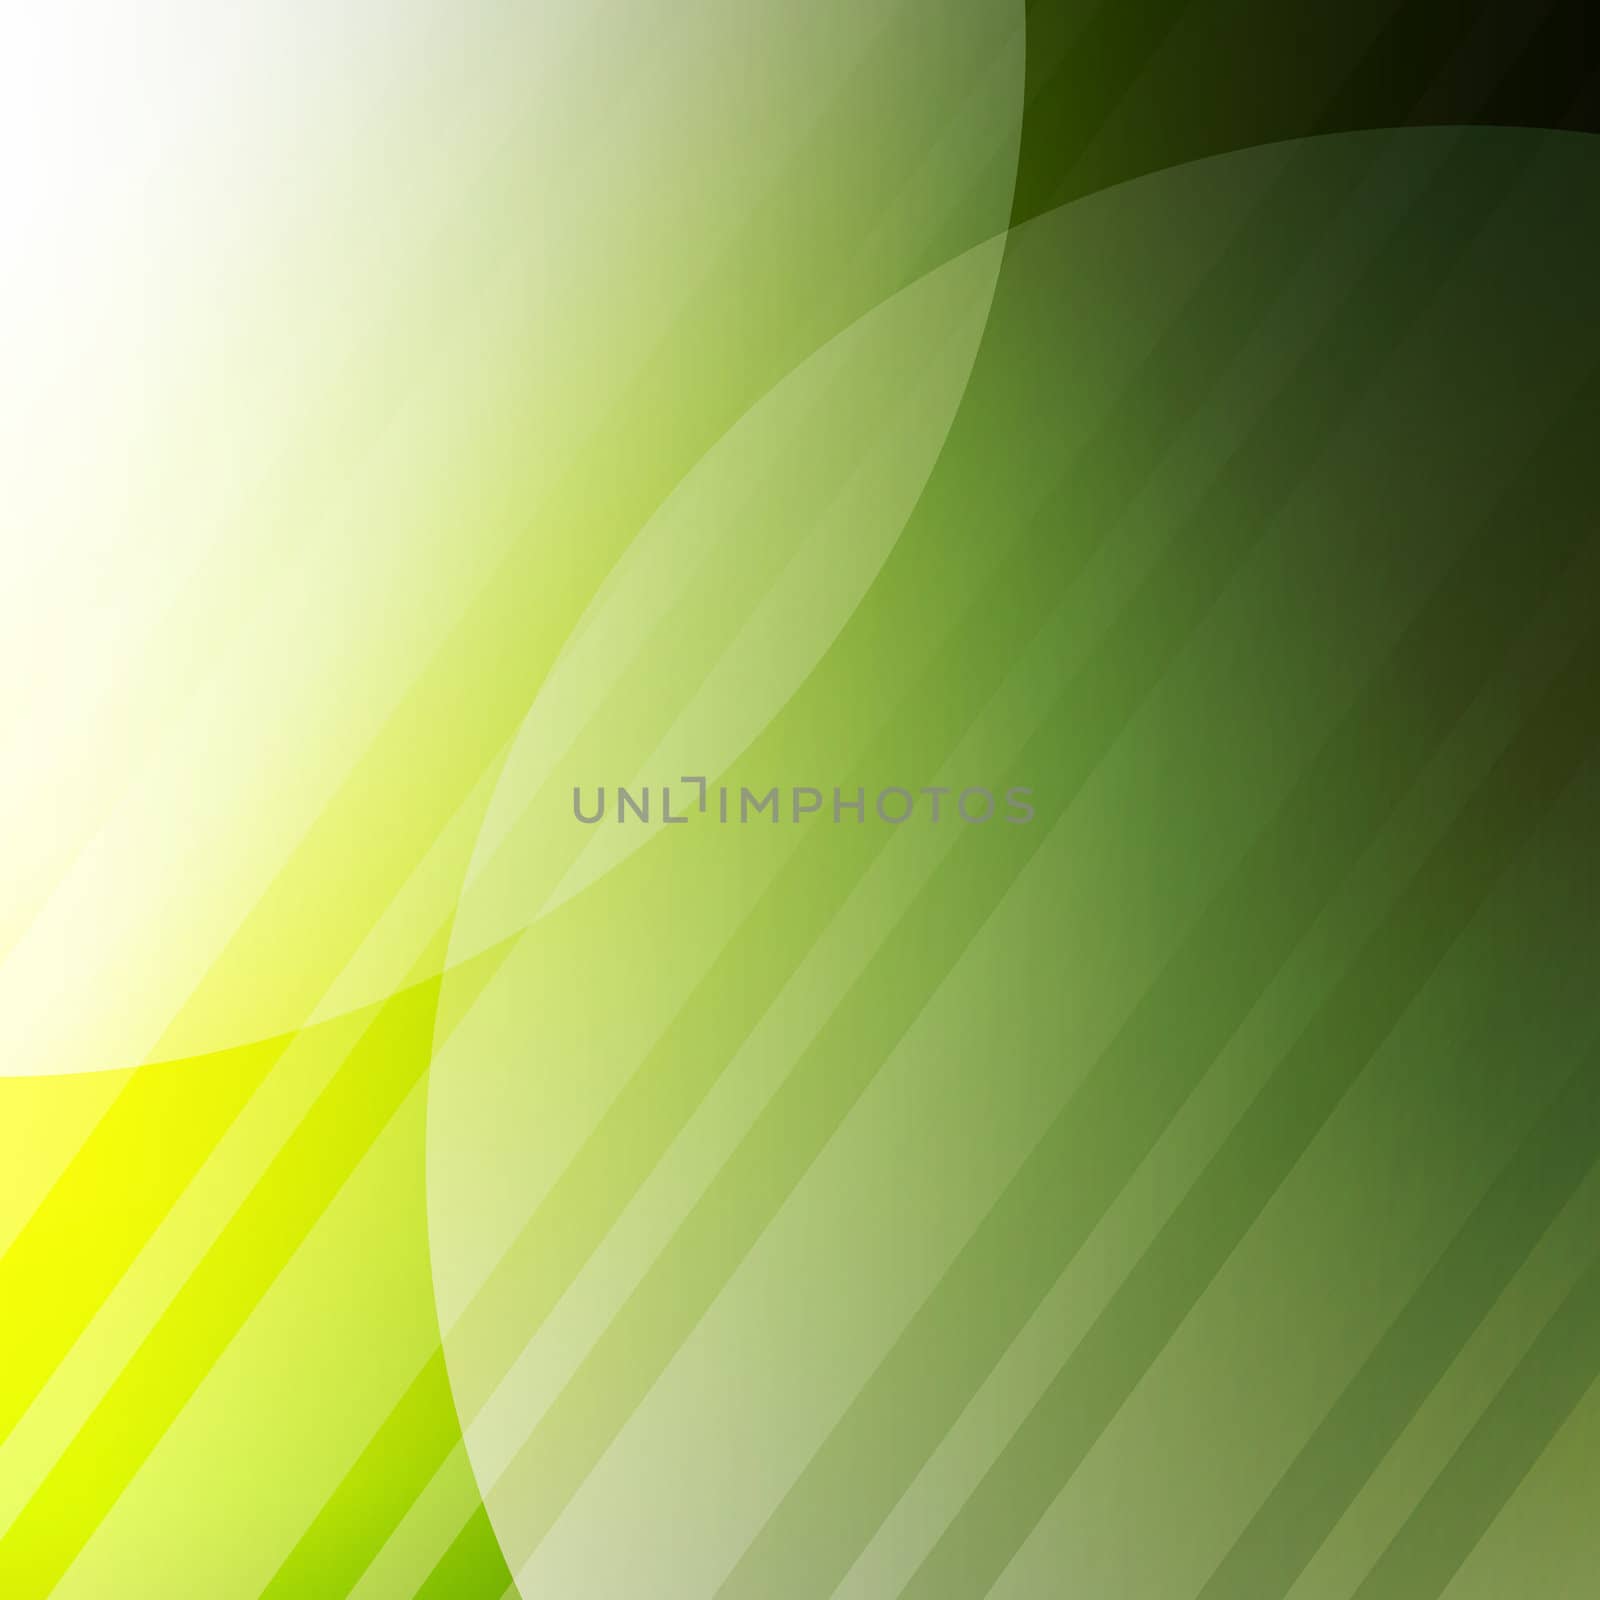 Web Green Background With Line, Vector Illustration